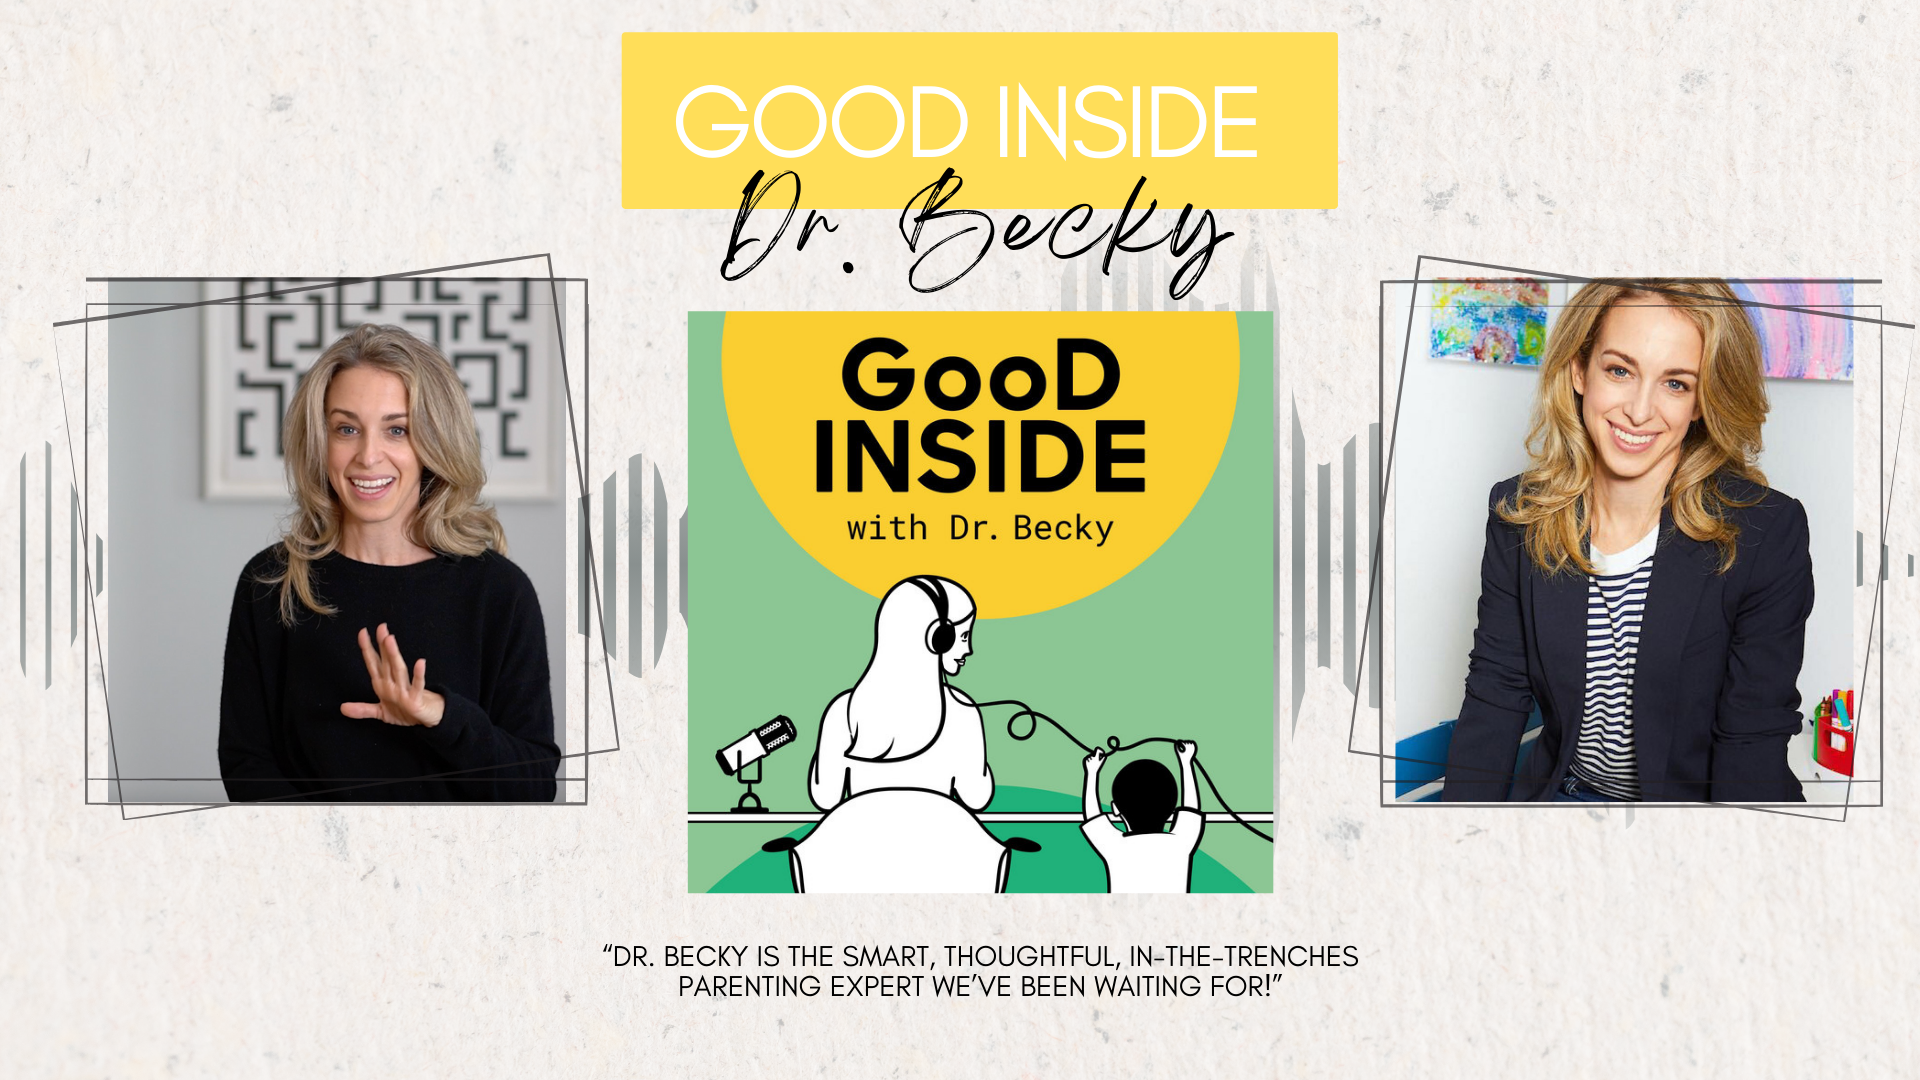 Good inside by Dr Becky